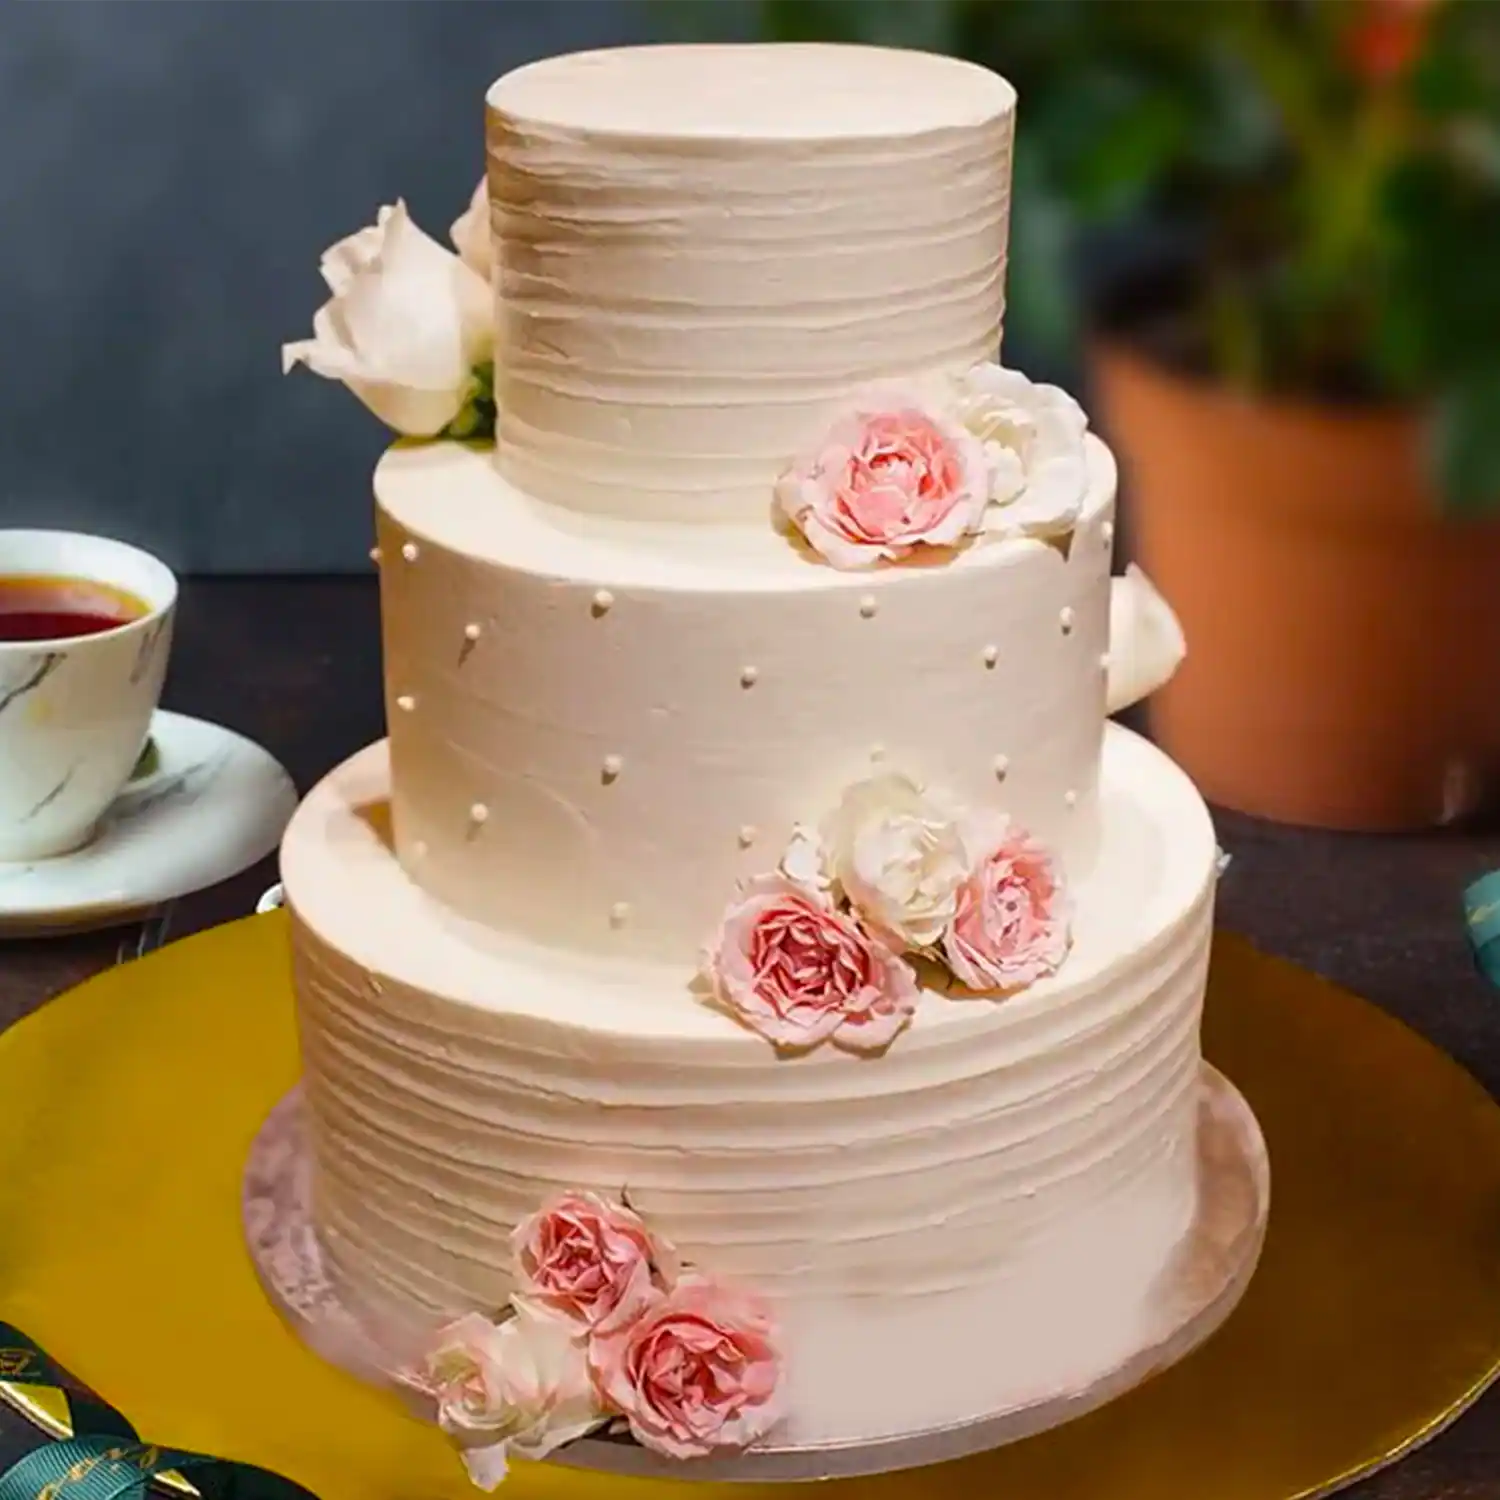 16 Types of Frosting to Decorate Cakes, Cookies and More - PureWow